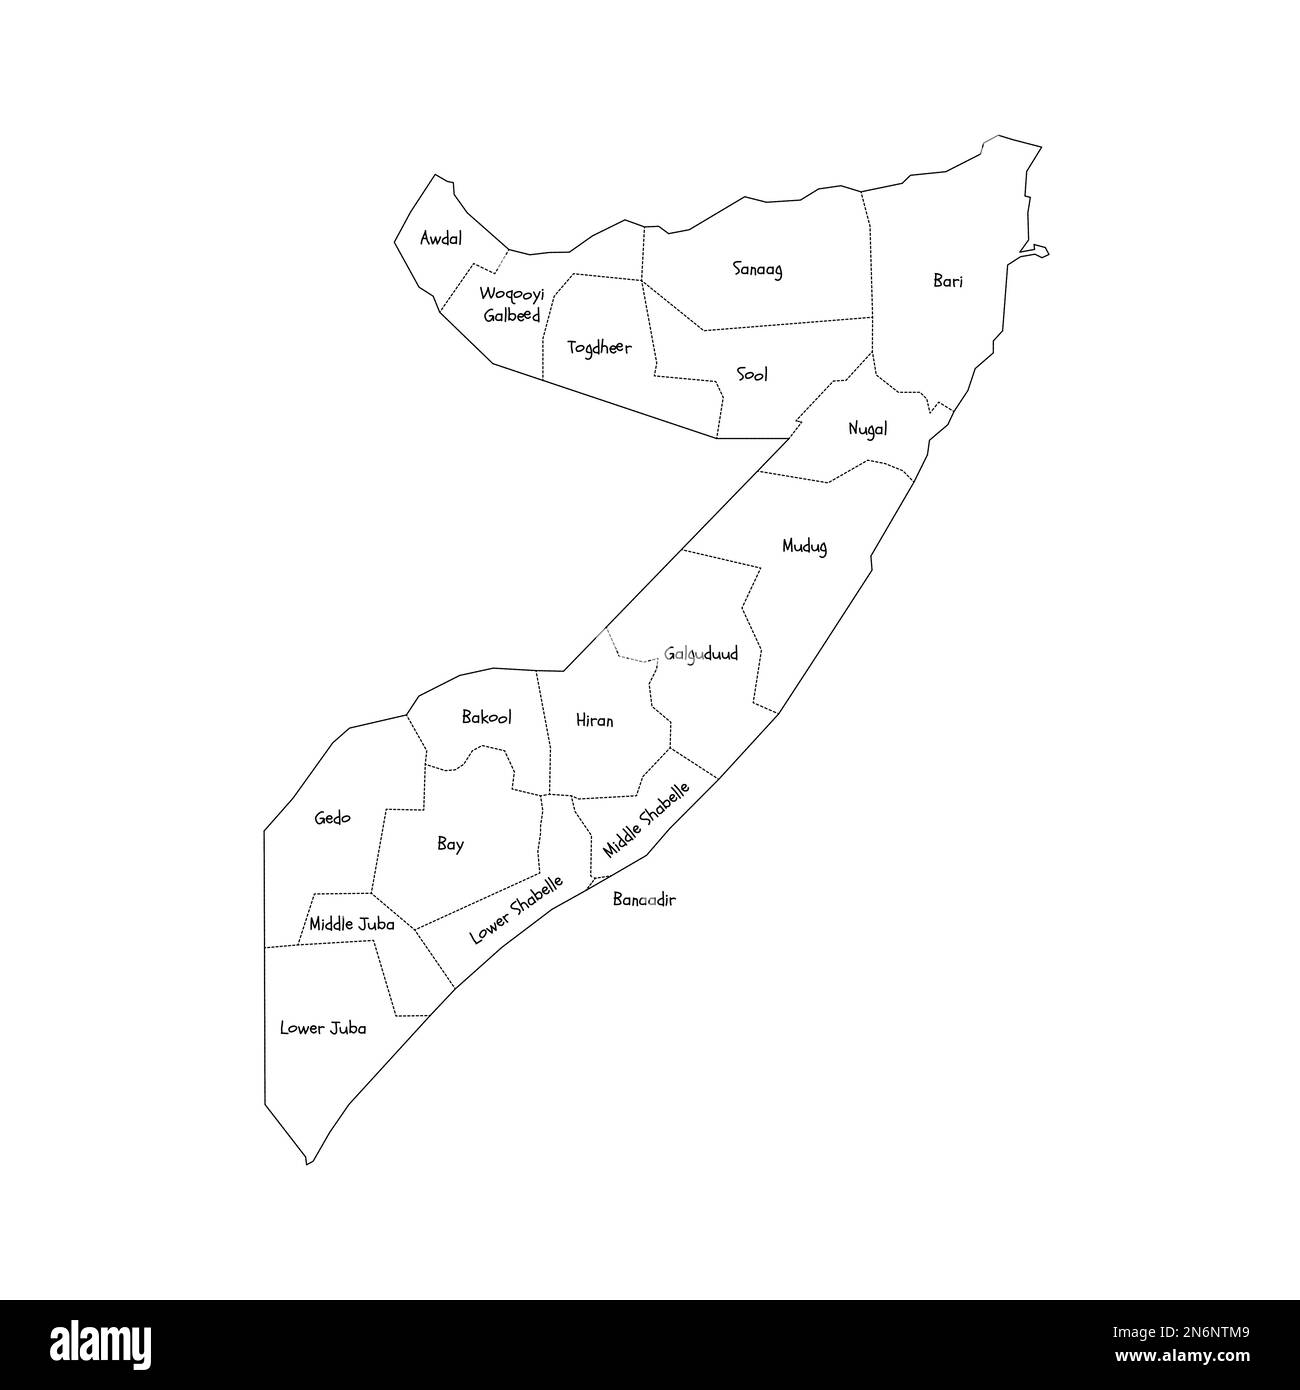 Somalia political map of administrative divisions - federal states. Handdrawn doodle style map with black outline borders and name labels. Stock Vector